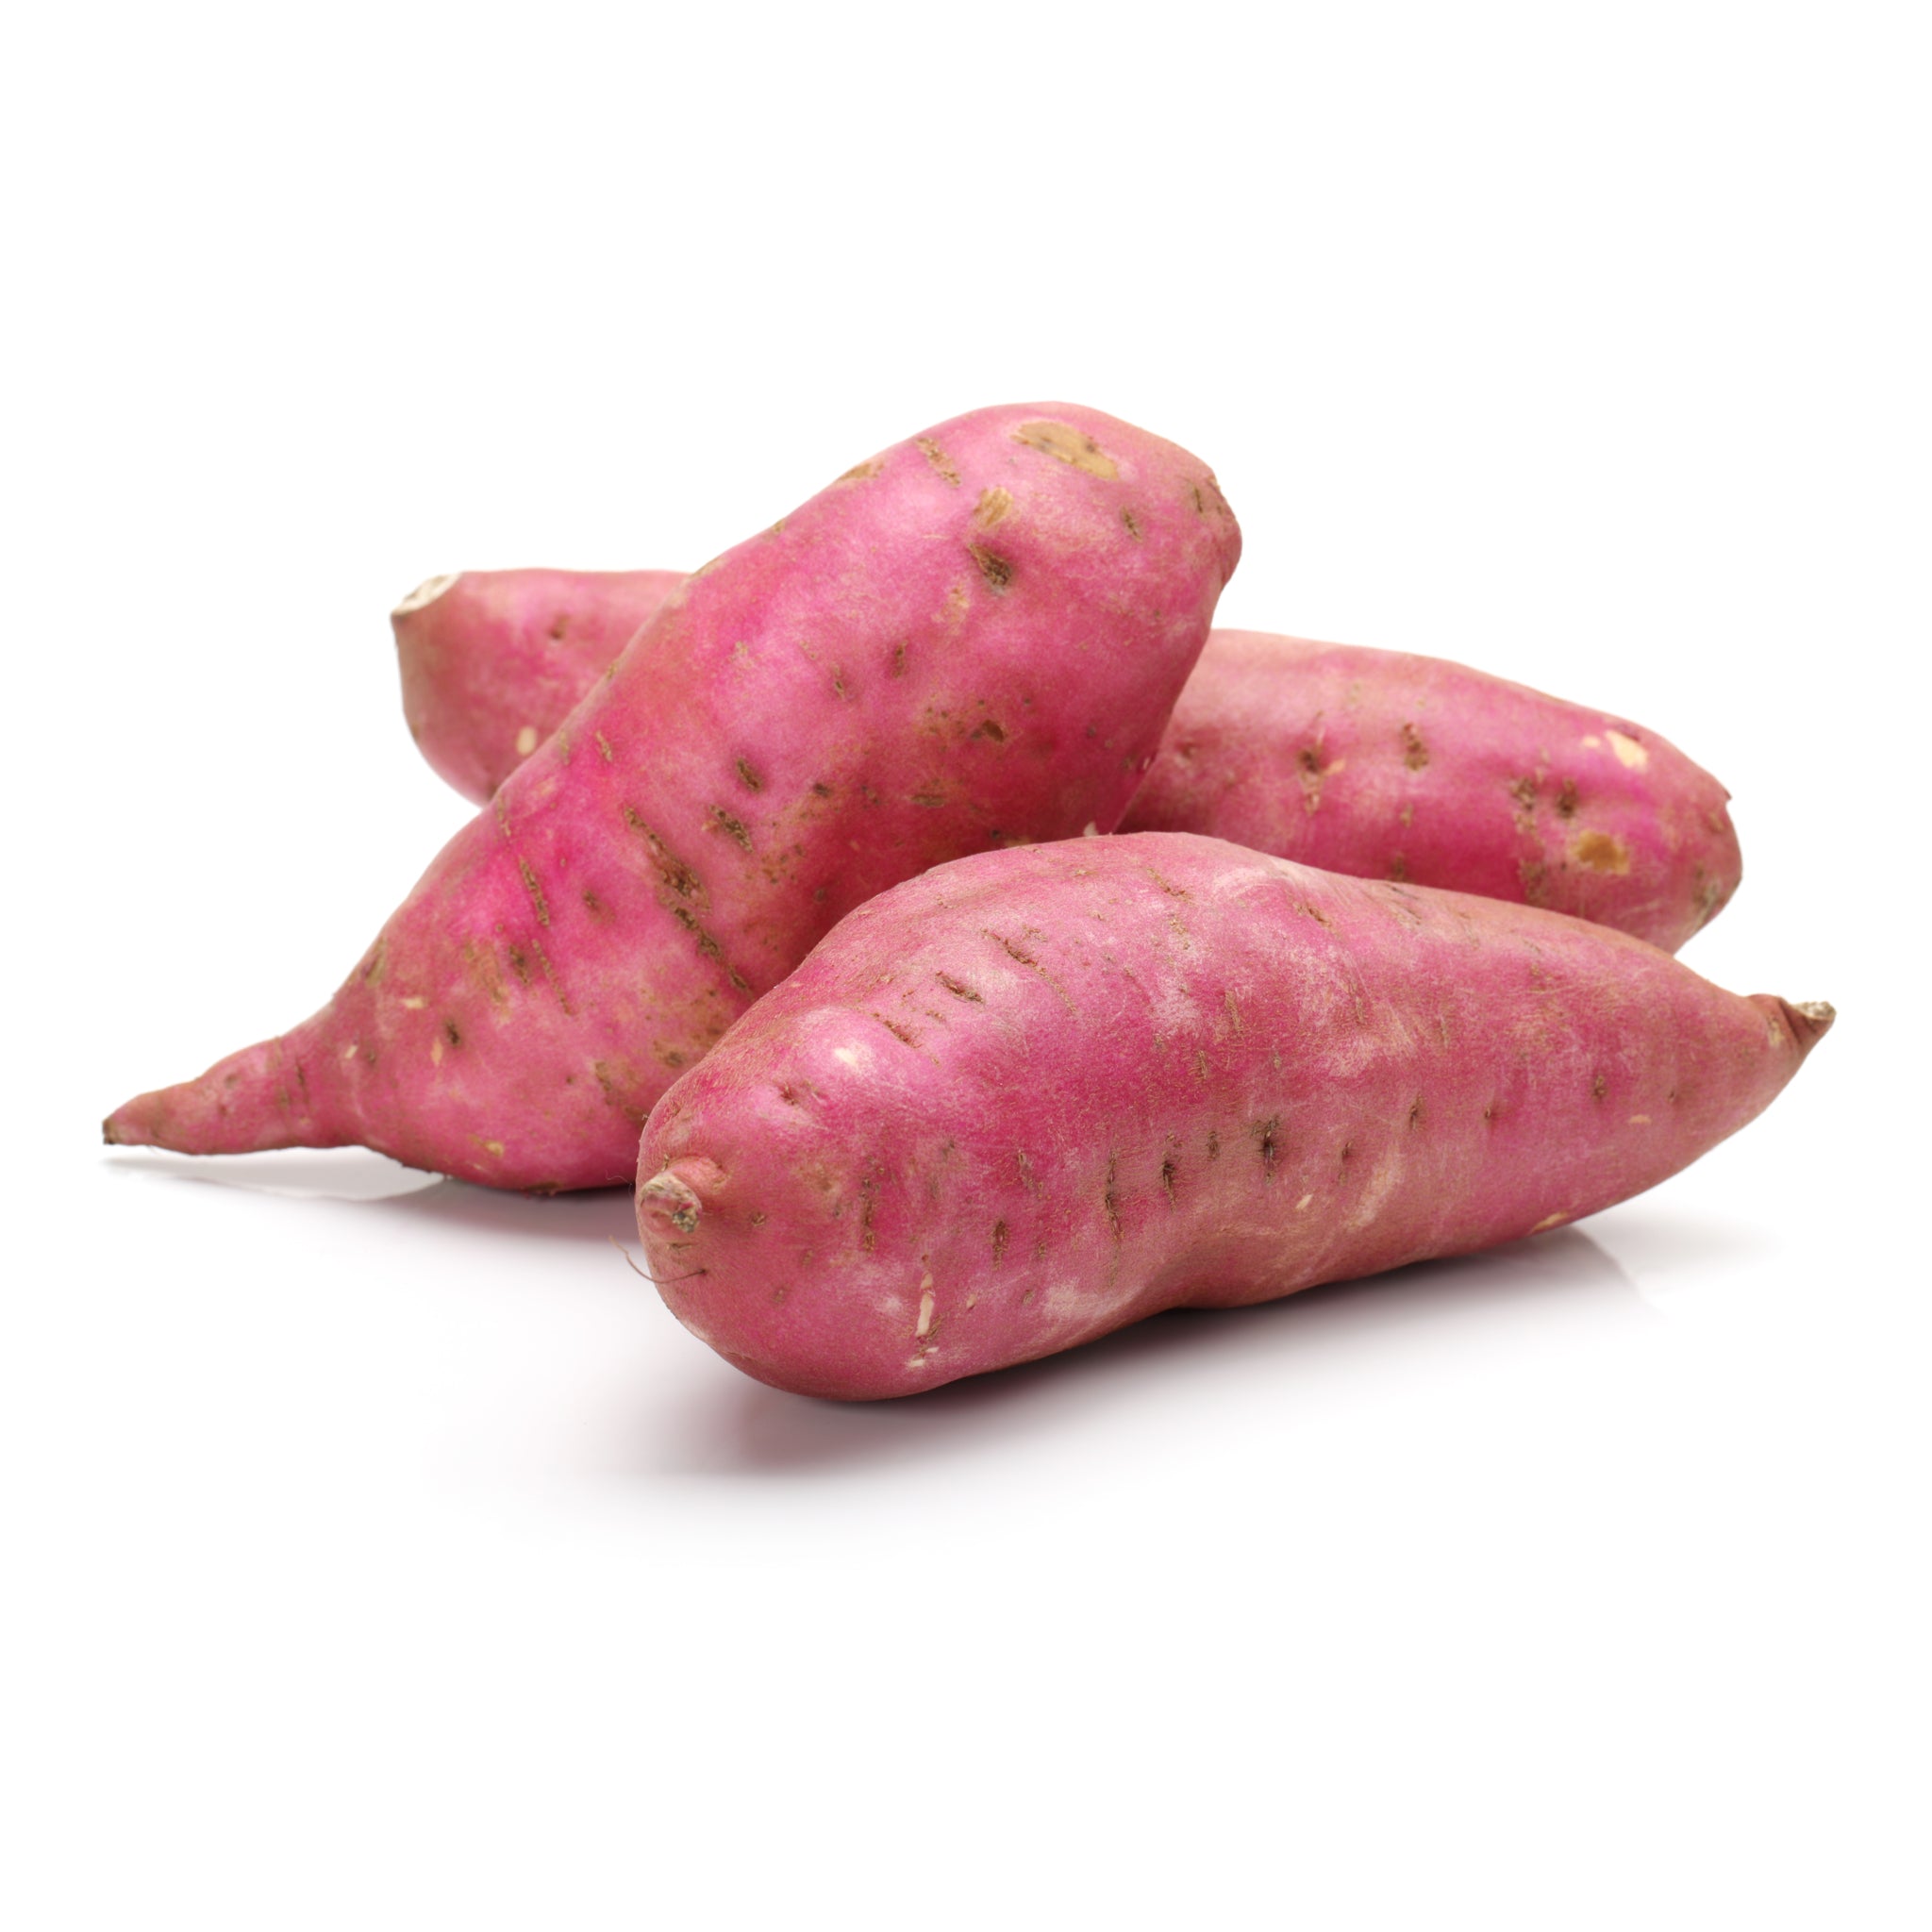 Fresh Red Sweet Potato Approx. 300g - Imported Weekly from Honduras